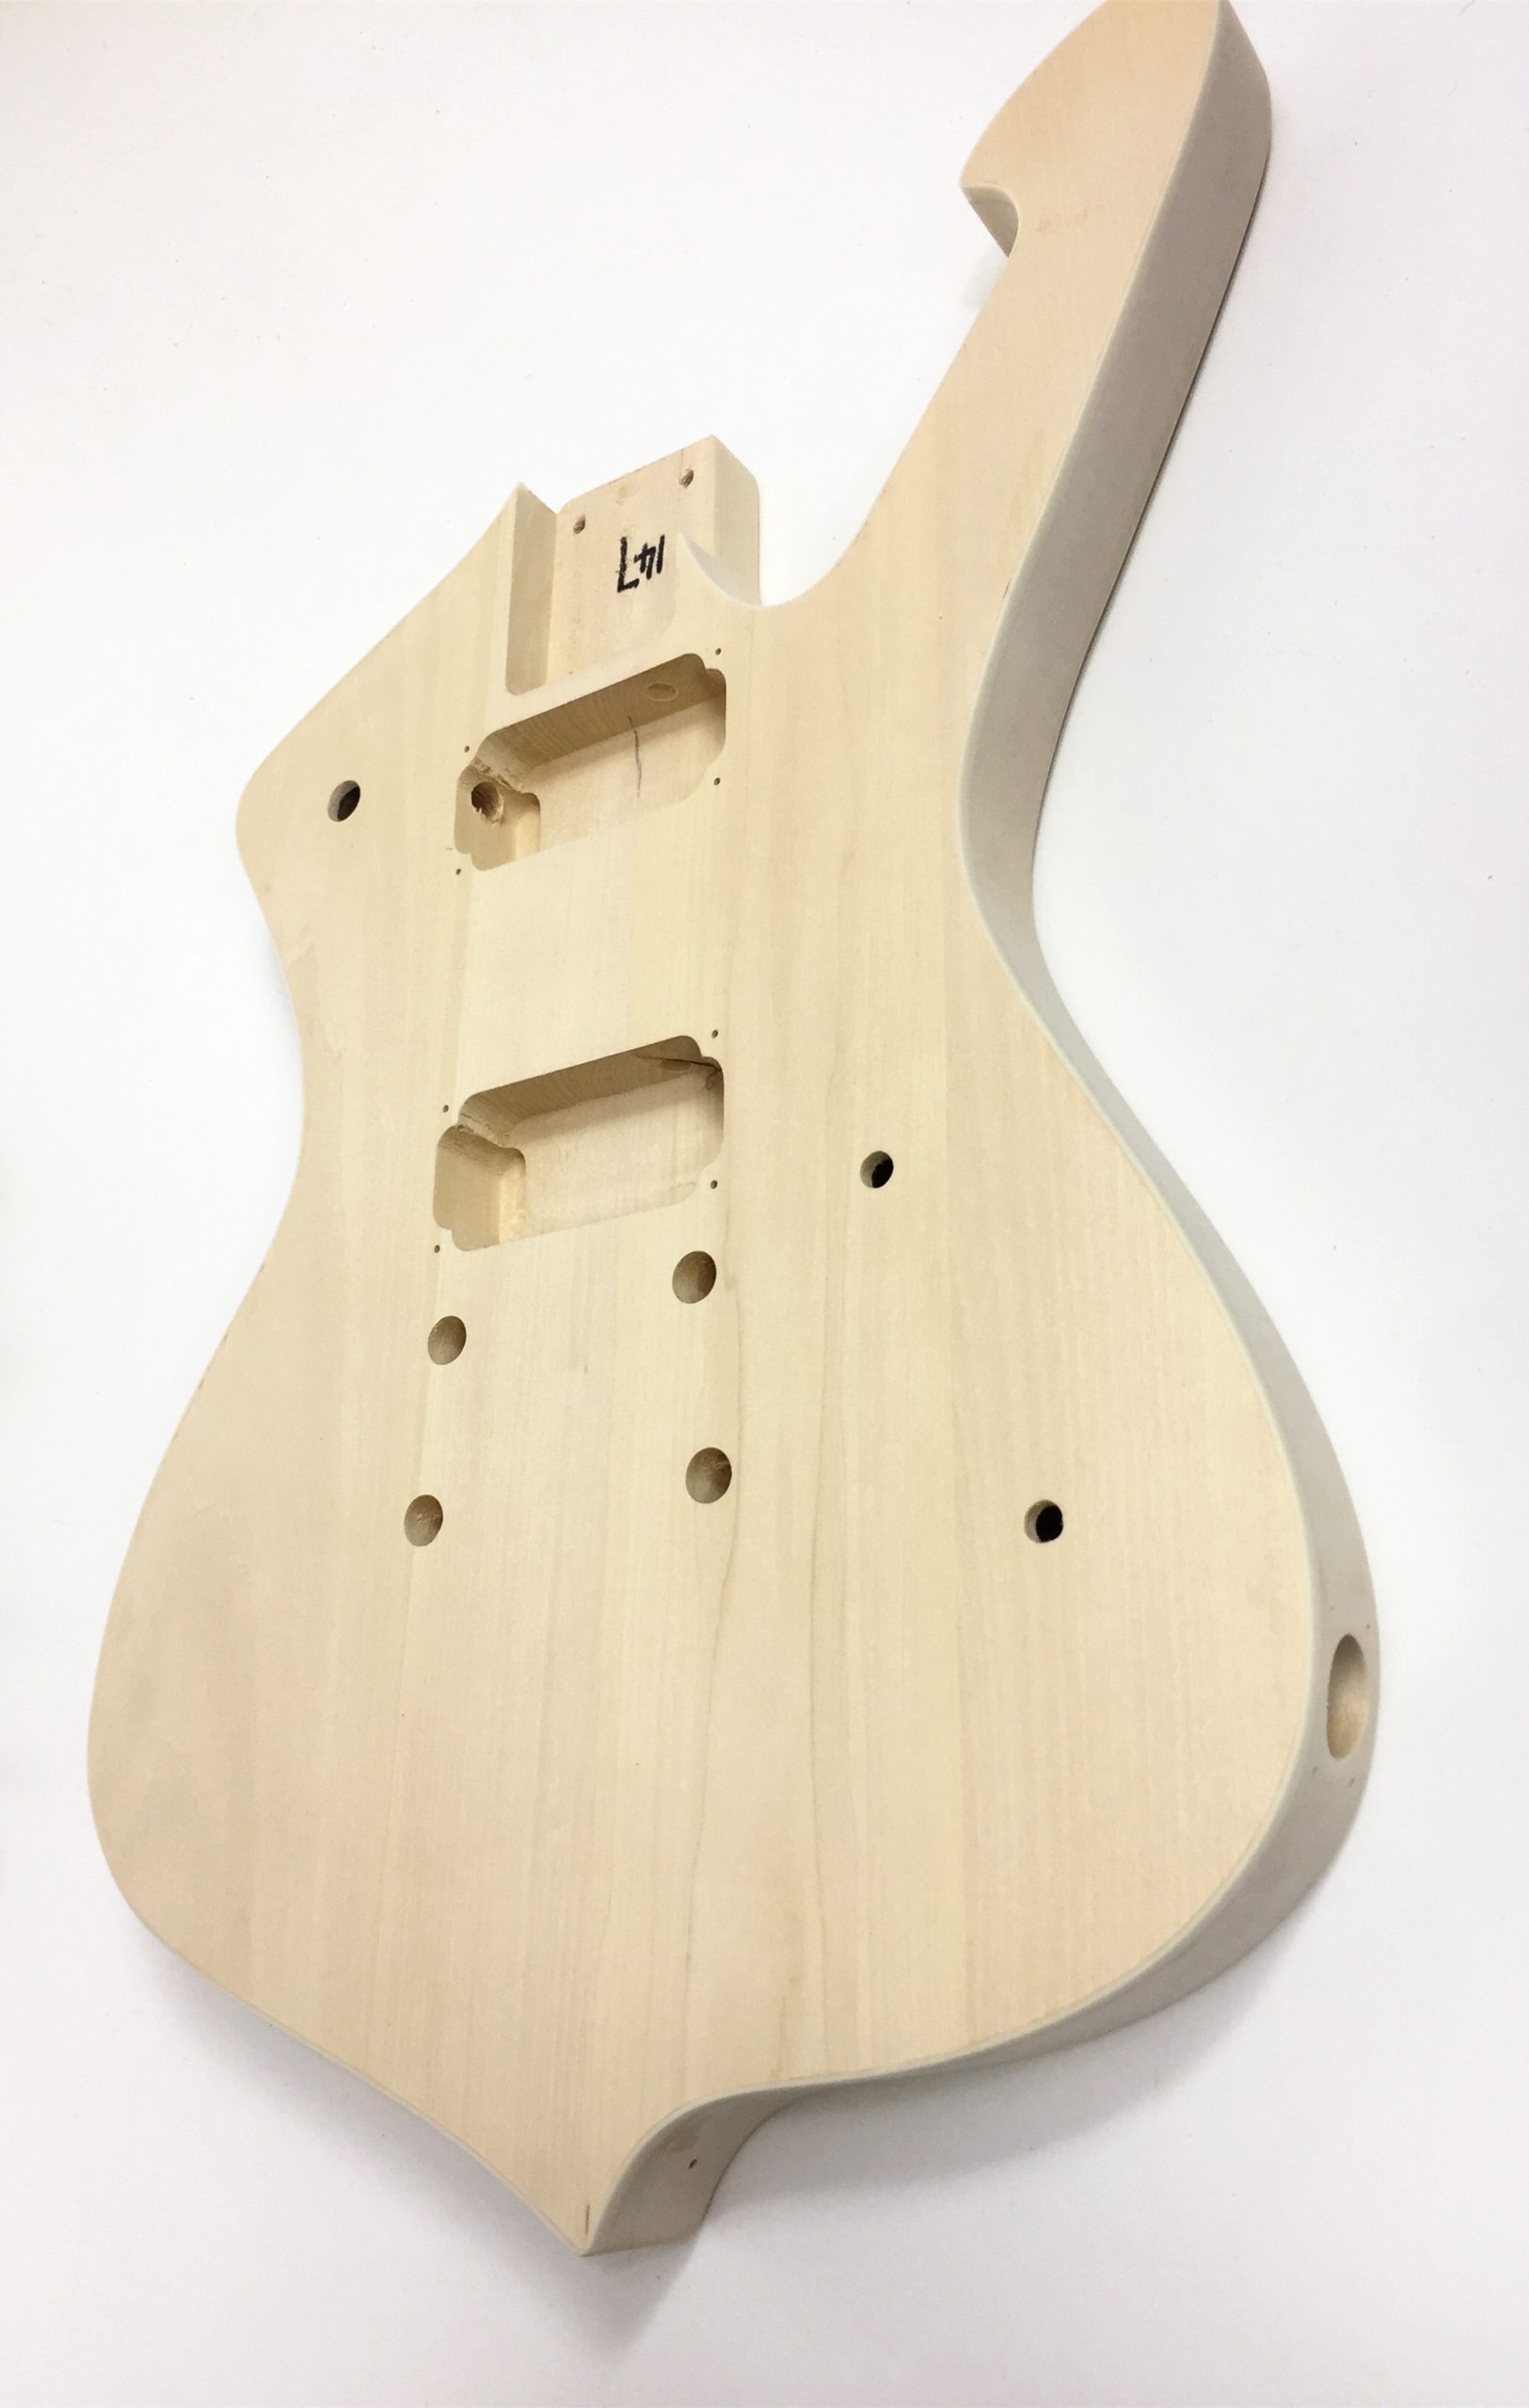  DIY Electric Bass Guitar Kits, Basswood Body, Maple Neck And  Fingerboard, Right, H Pickups, All Accessories Included